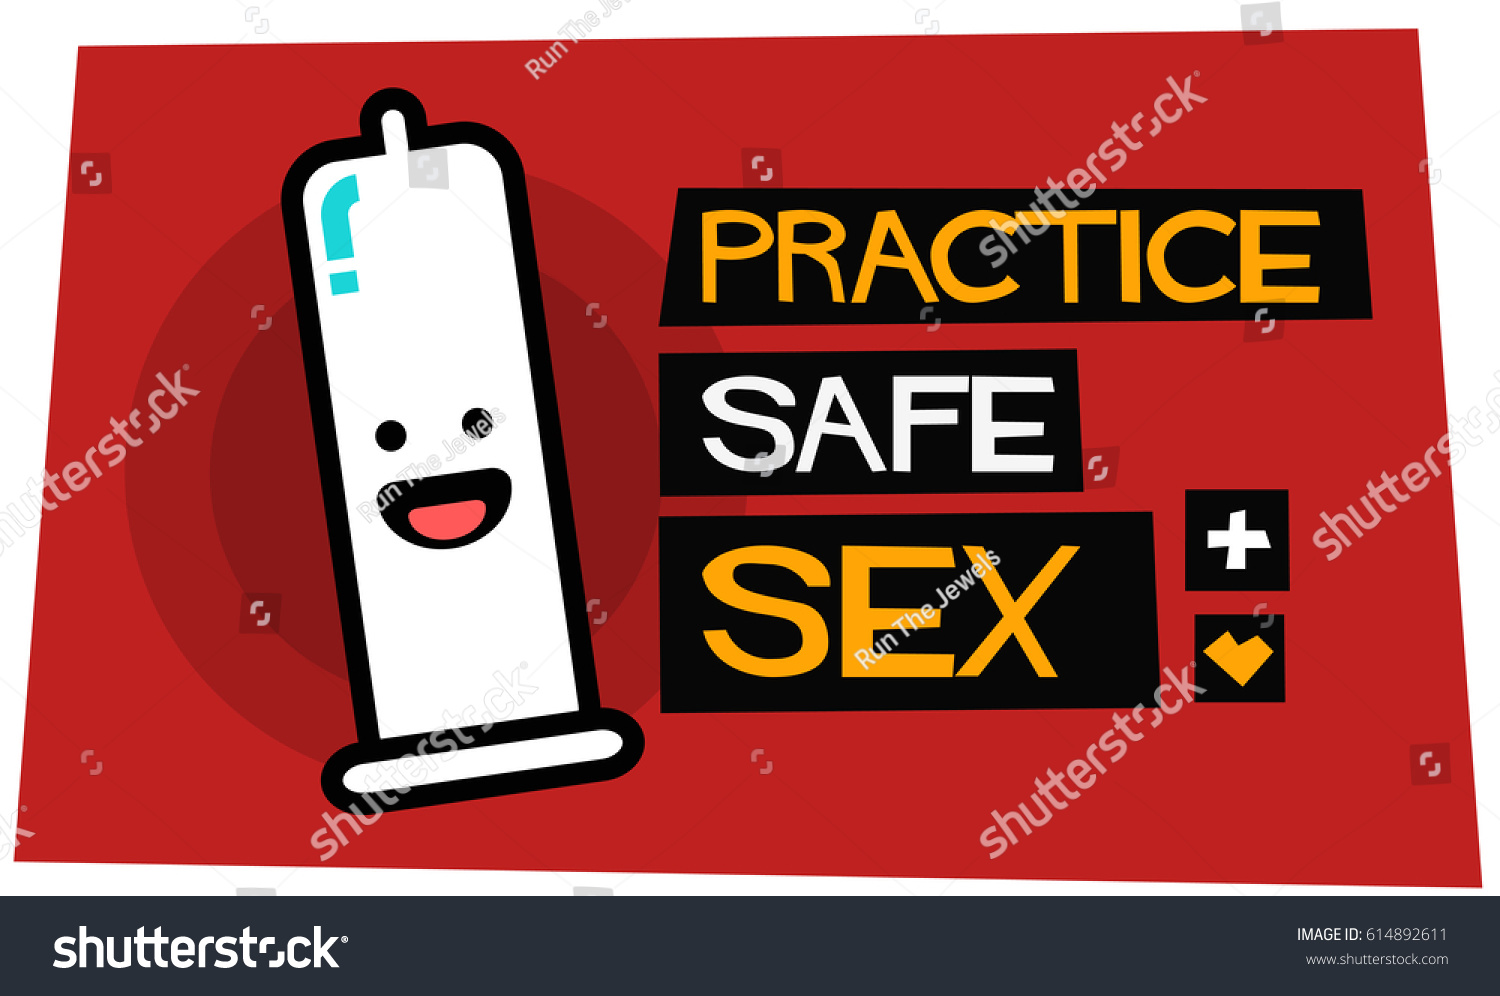 Practice Safe Sex Sexual Health Poster Stock Vector Royalty Free 614892611 4257